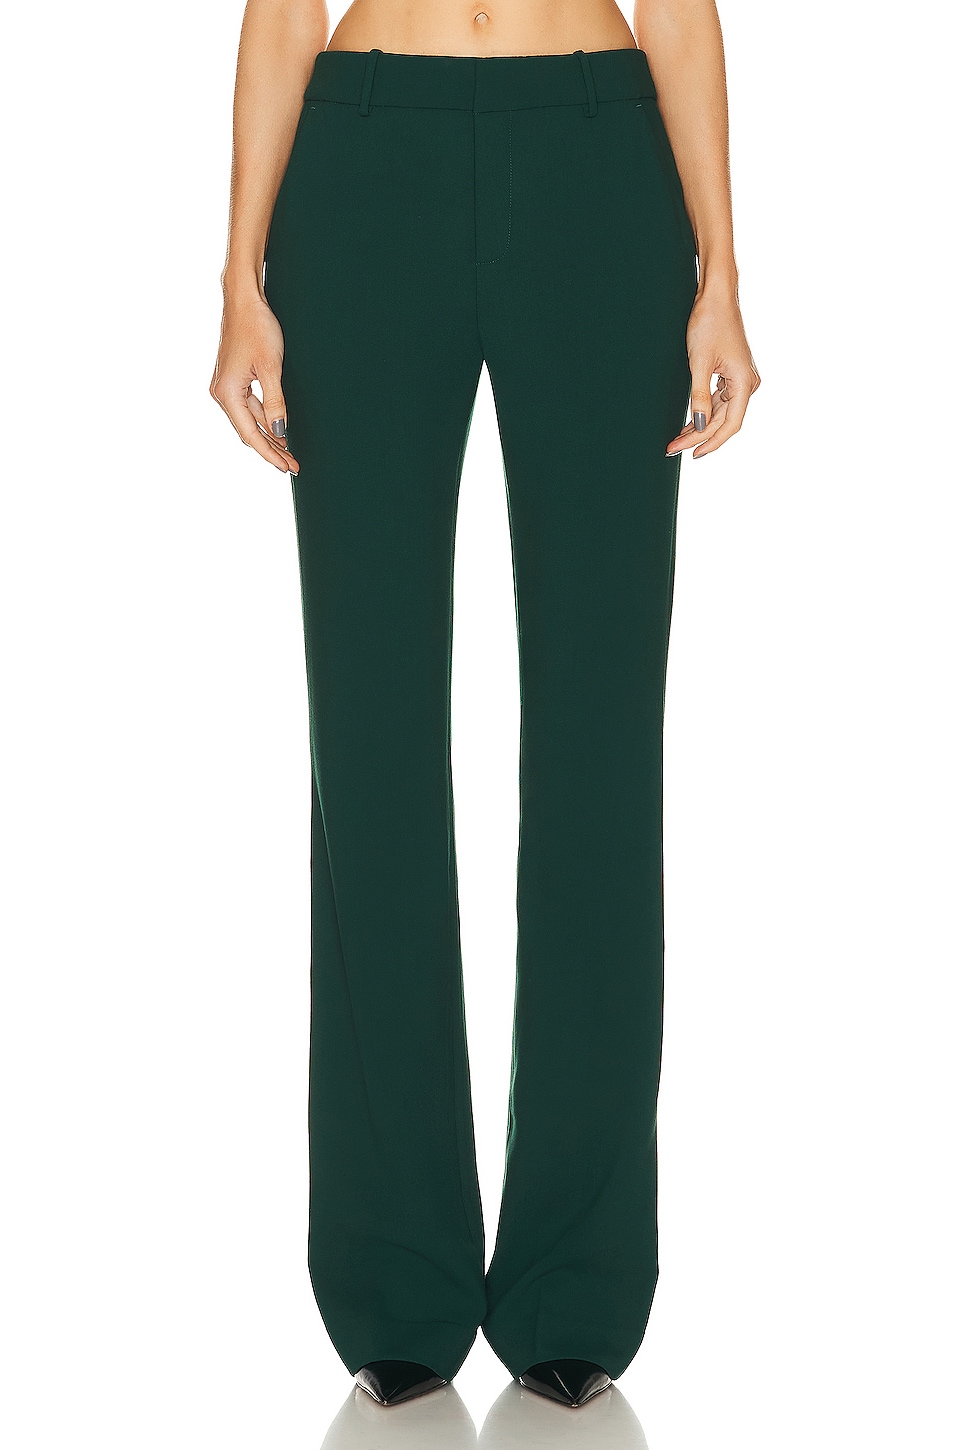 Image 1 of GRLFRND The Suit Trouser in Pine Green